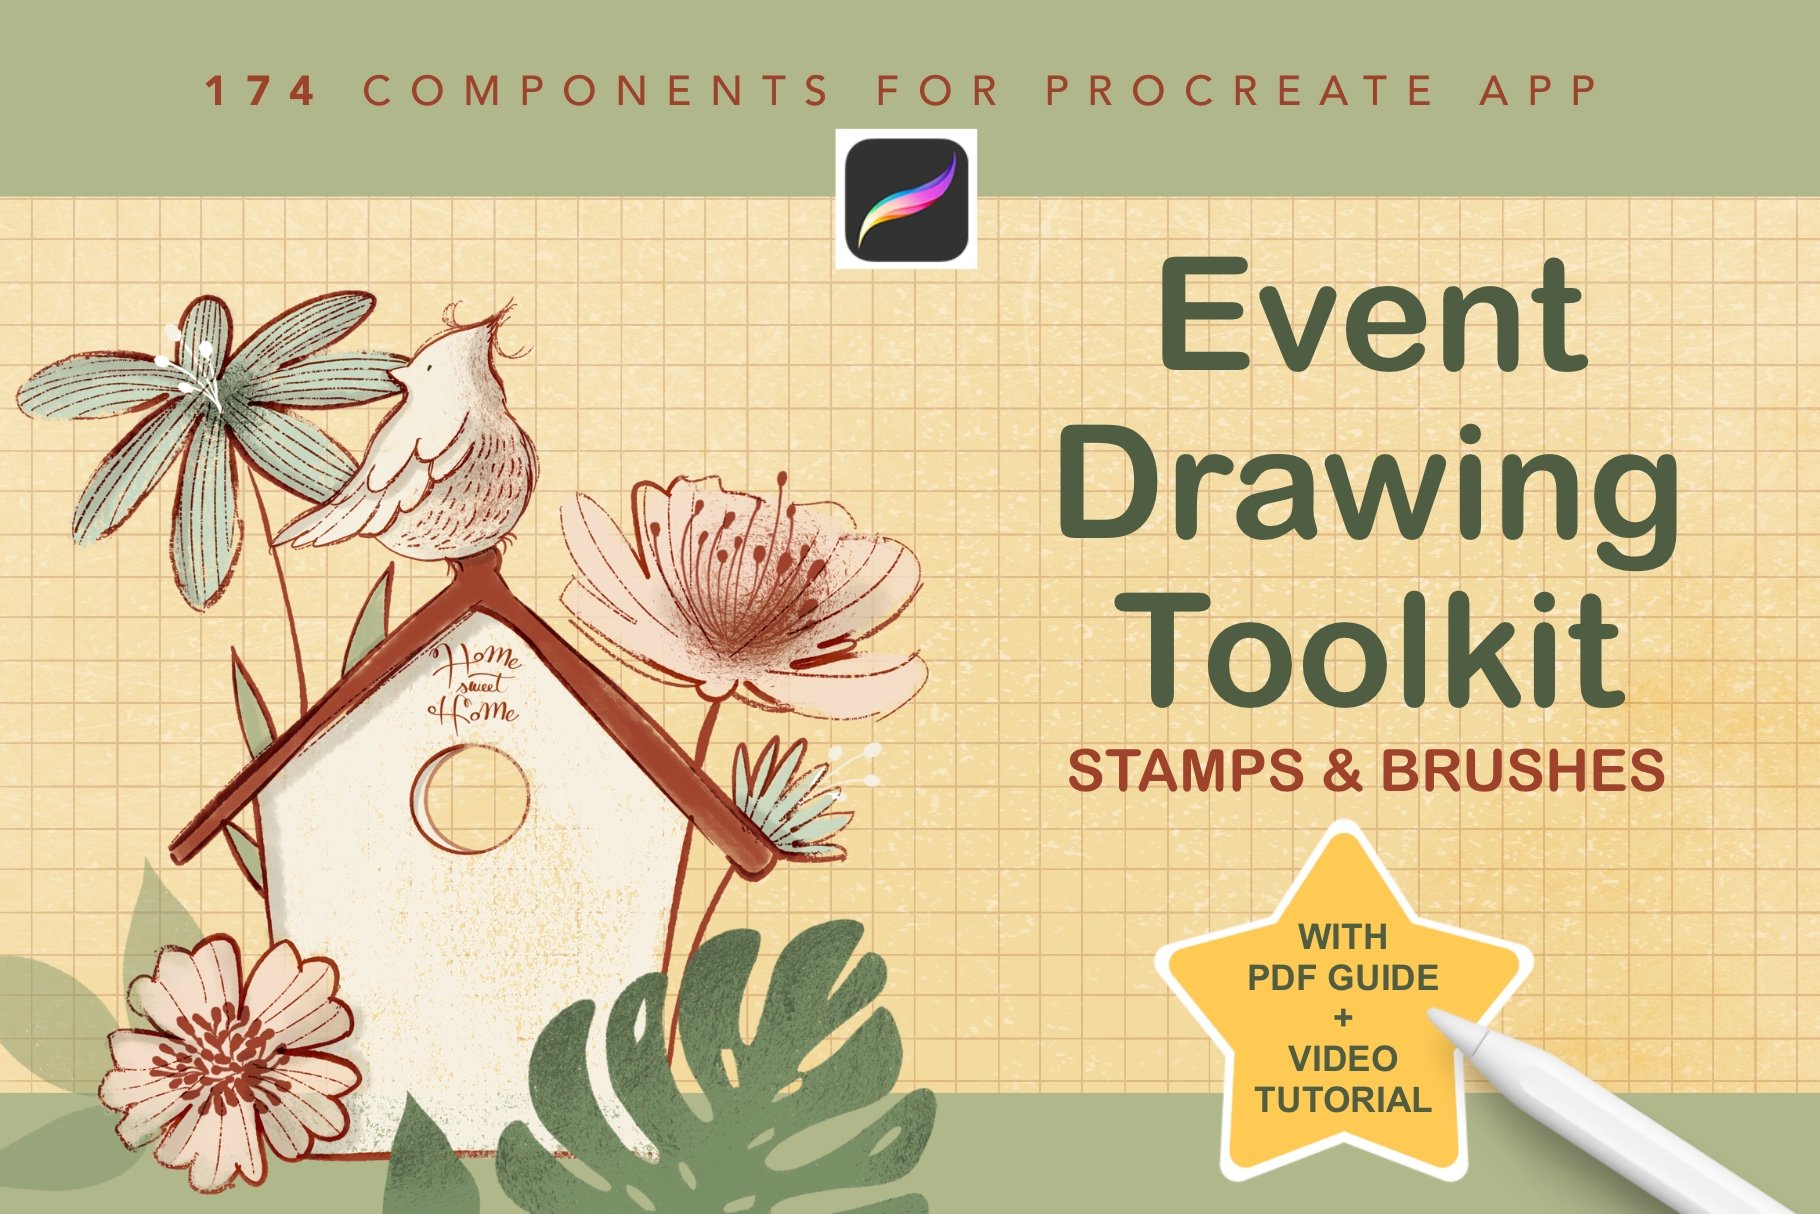 Pretty Pencils - Drawing & Sketching Toolkit - Design Cuts